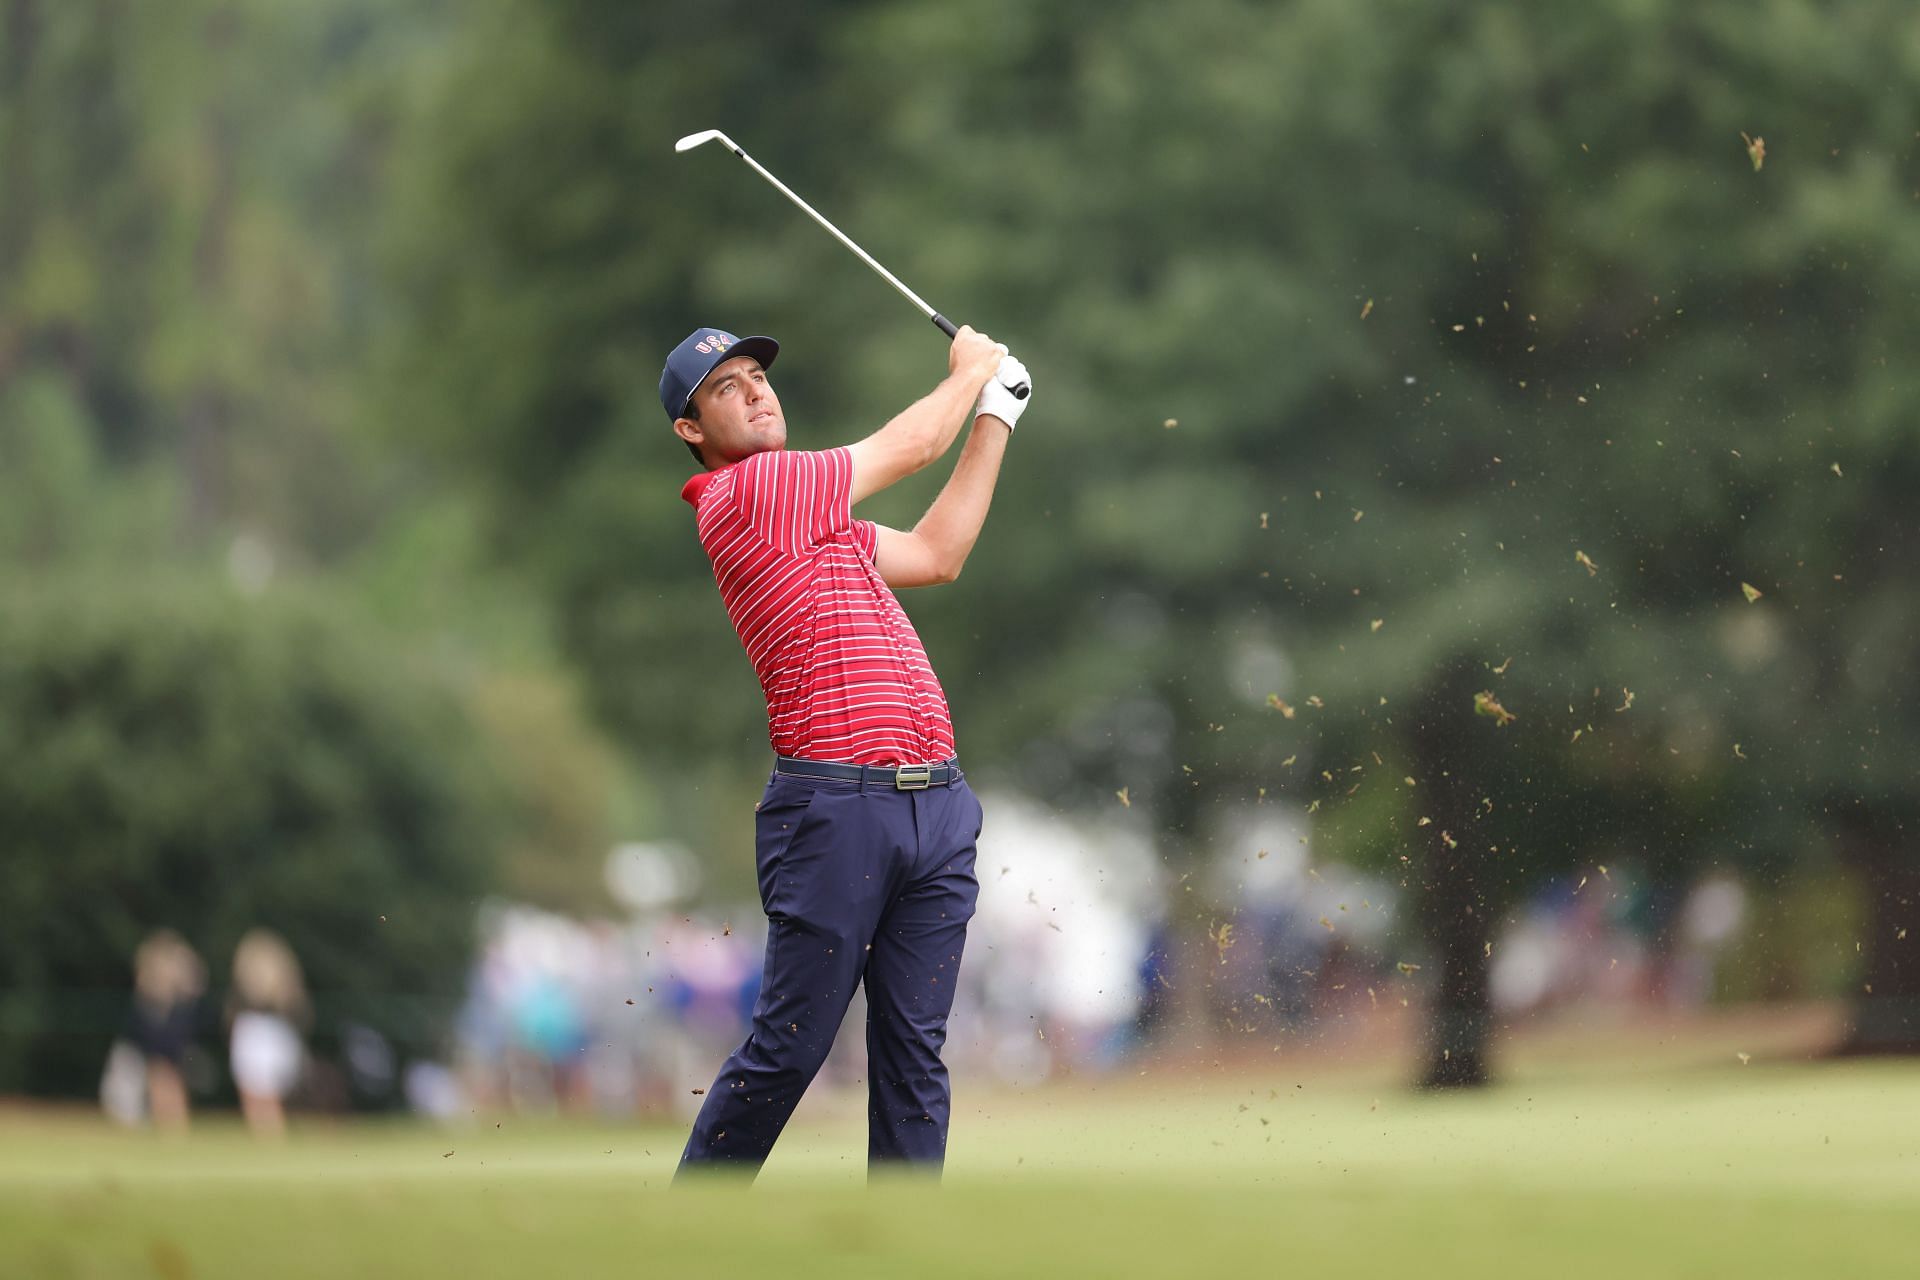 Scottie Scheffler at the 2022 Presidents Cup - Day Four (Image via Stacy Revere/Getty Images)